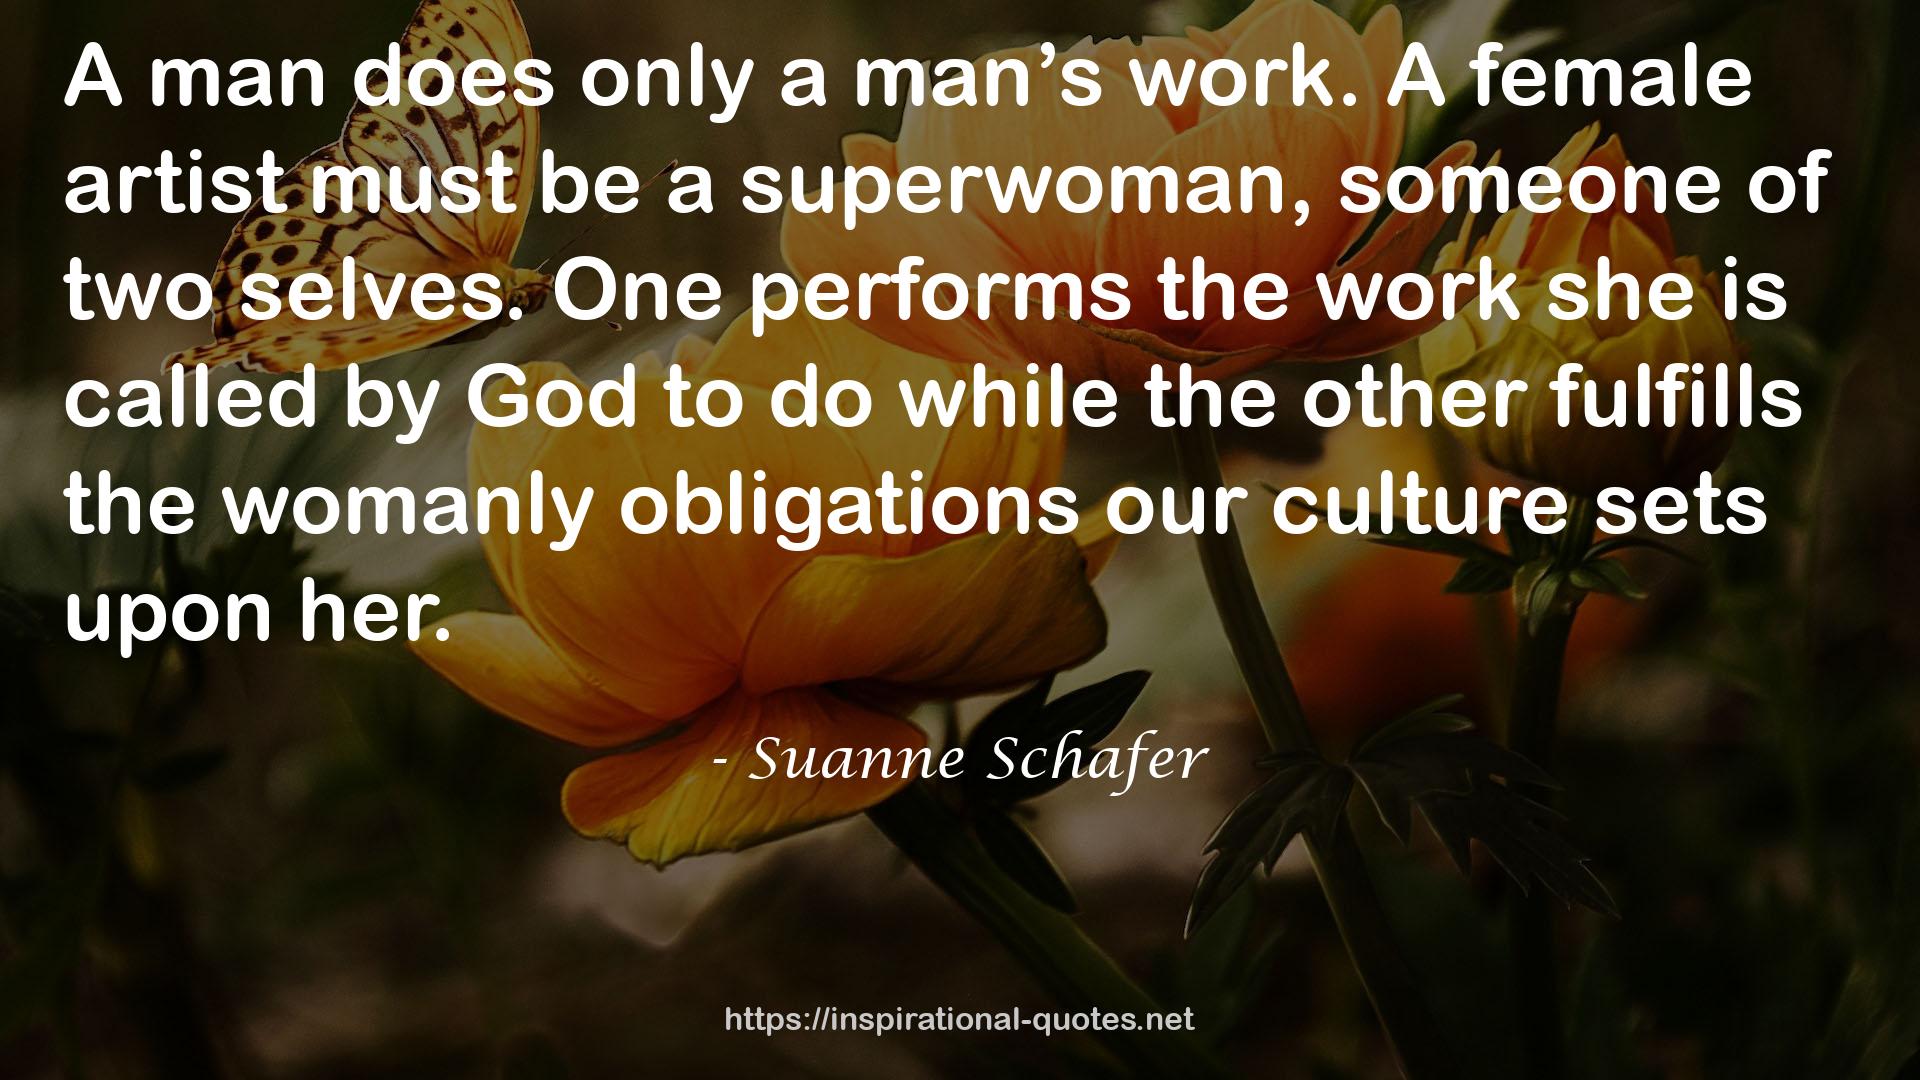 Suanne Schafer QUOTES